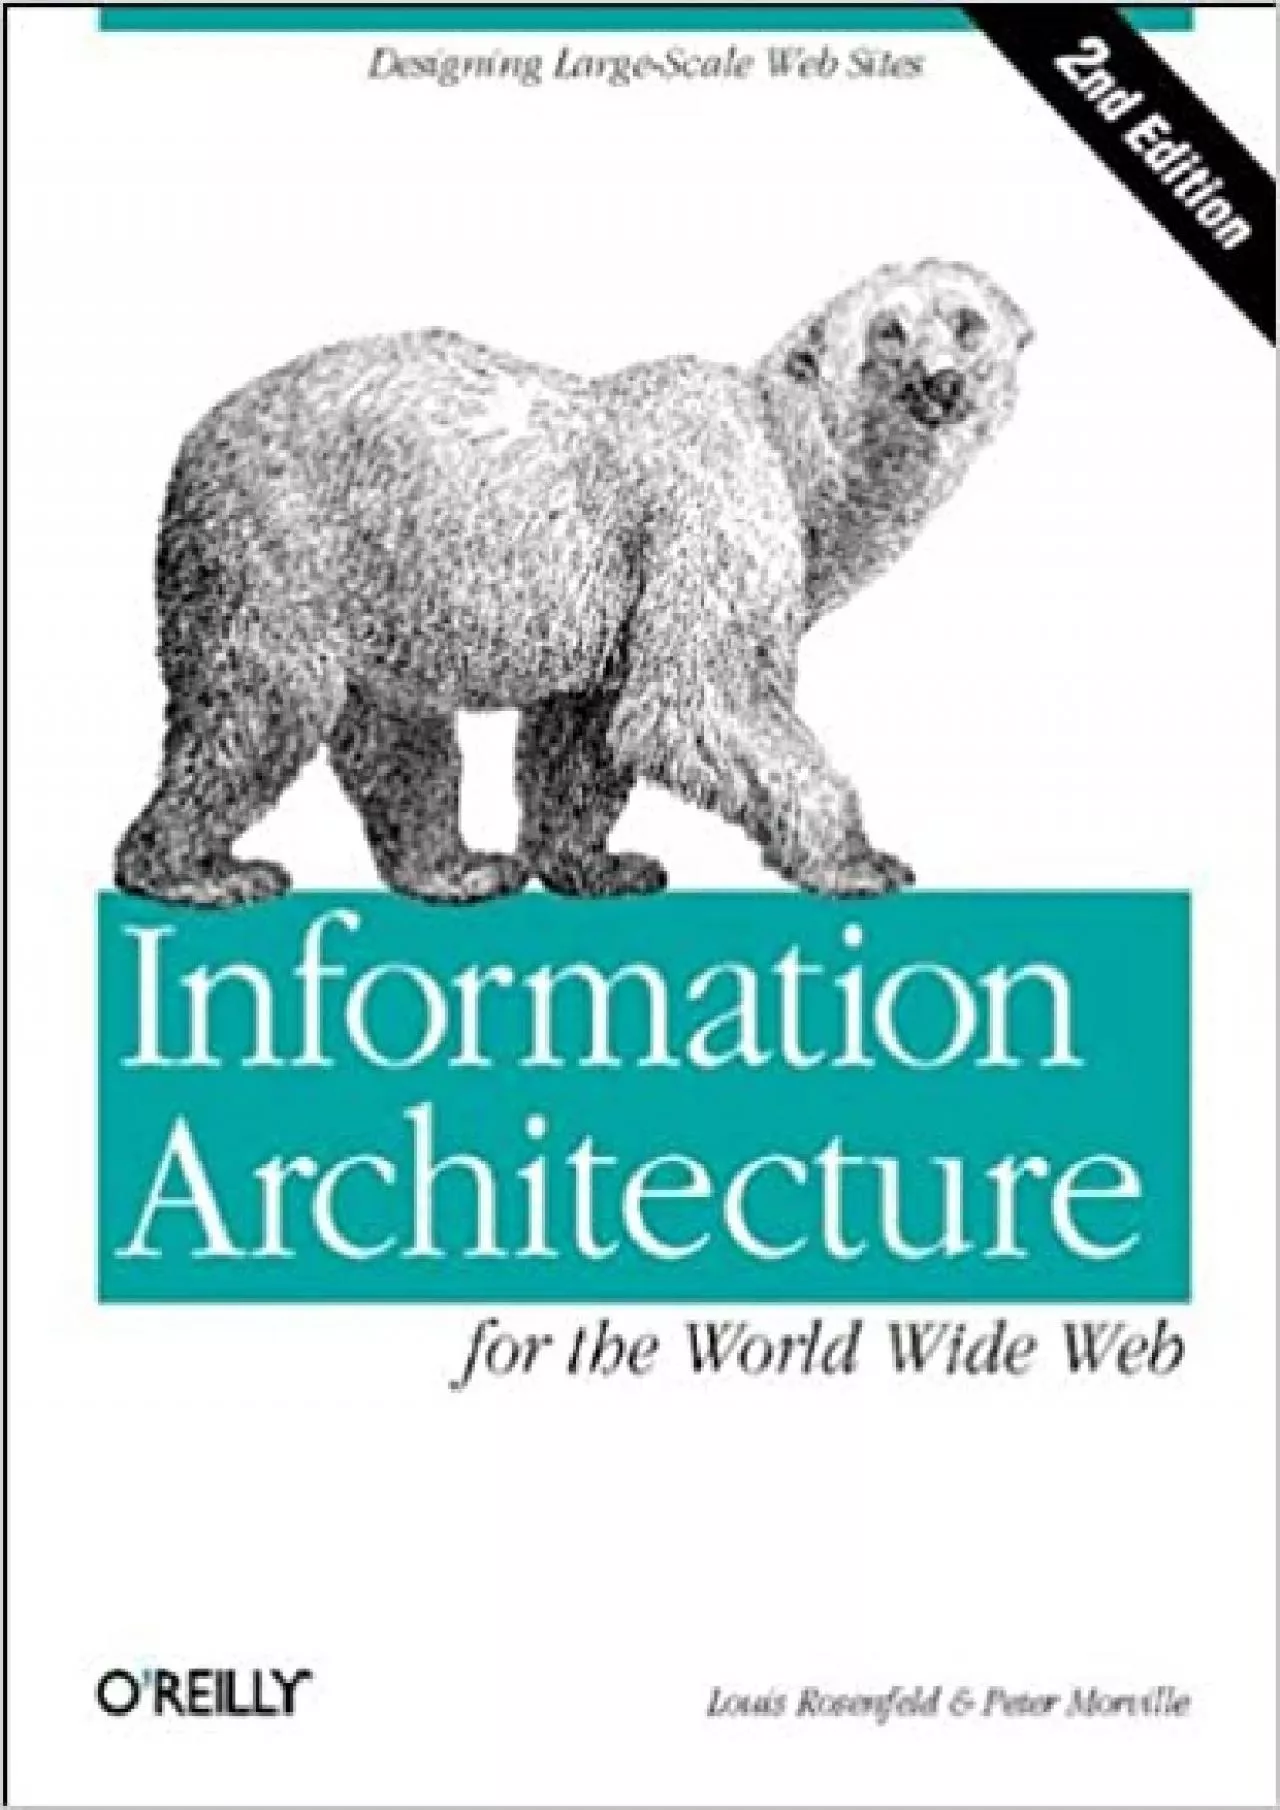 (DOWNLOAD)-Information Architecture for the World Wide Web Designing Large-Scale Web Sites